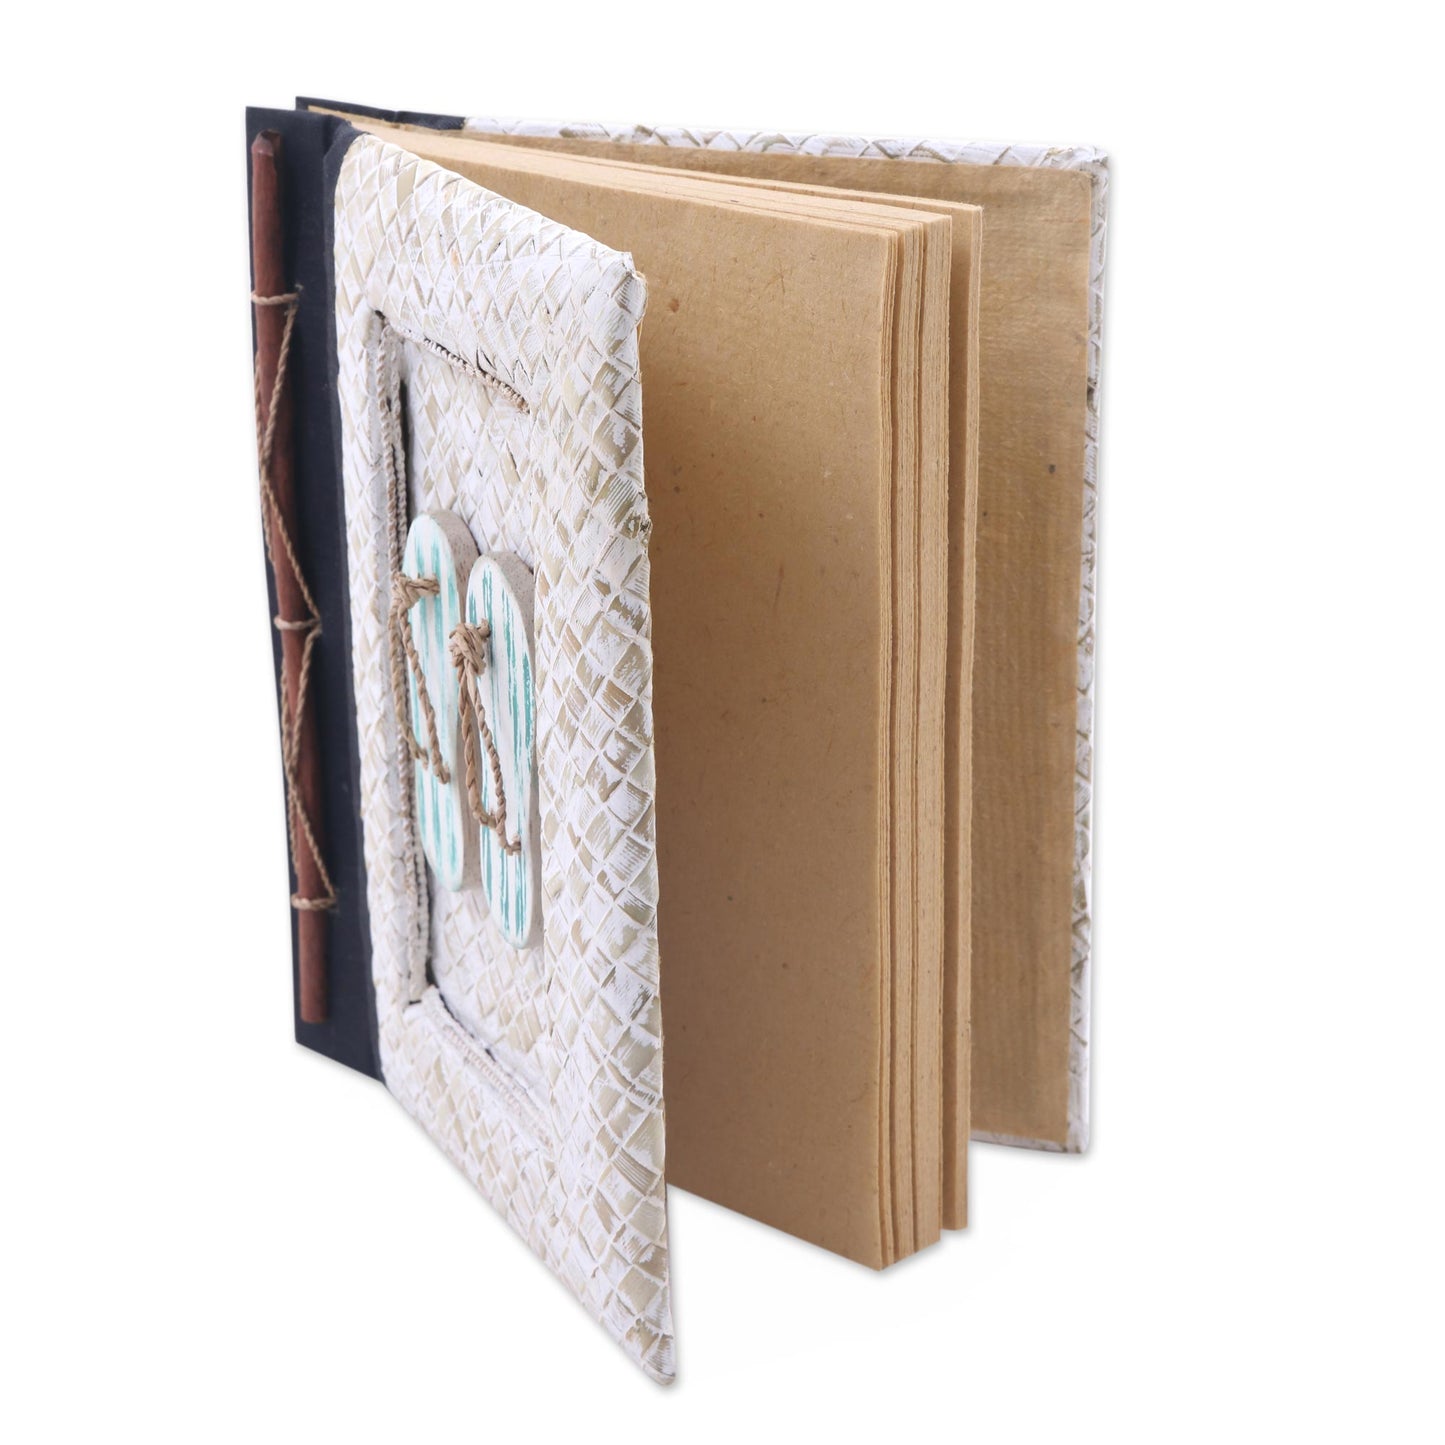 The Path Is Green Balinese 50-page Rice Paper Journal with Natural Fiber Cover